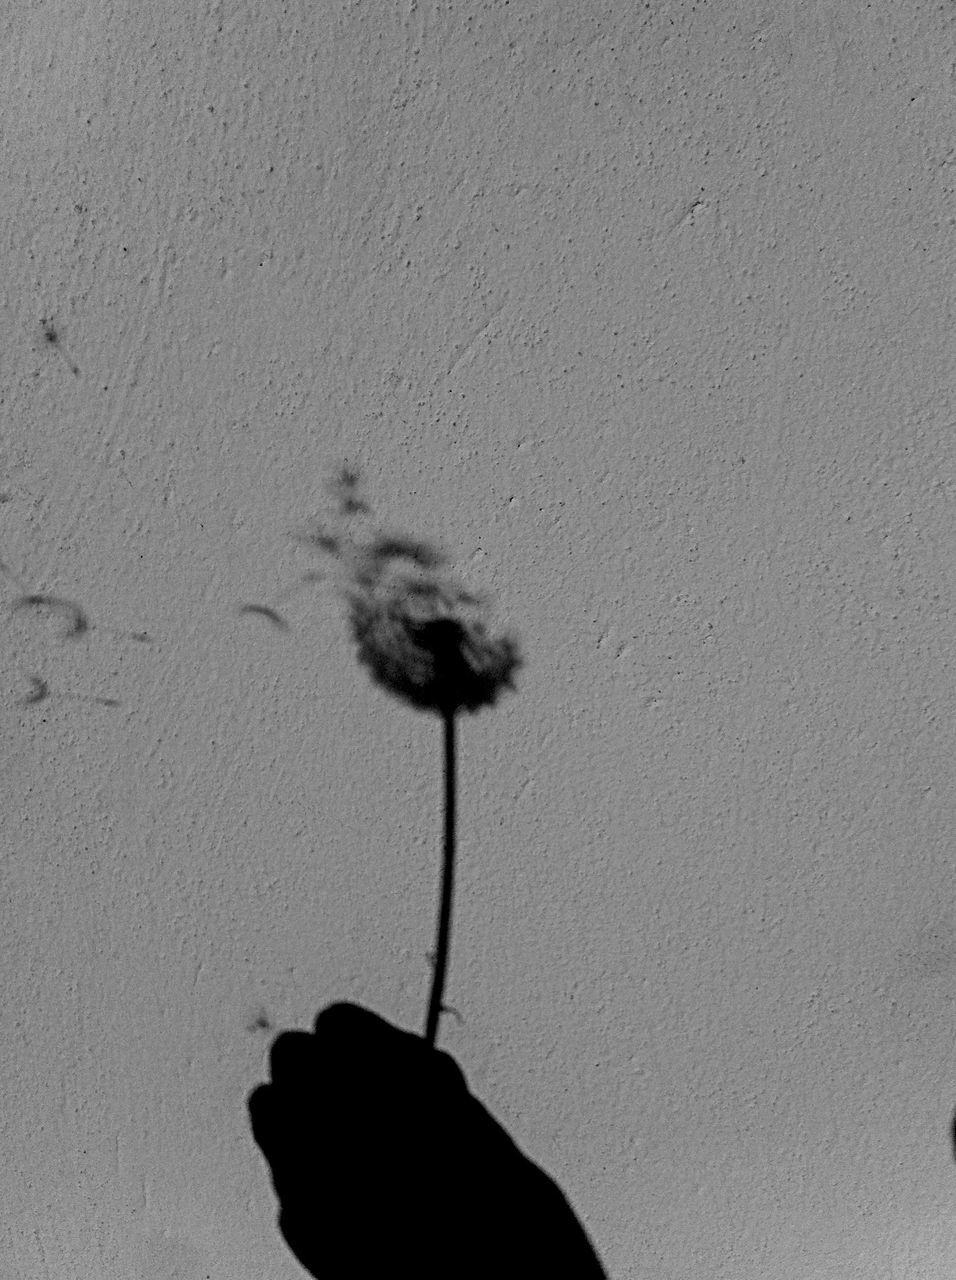 one person, shadow, high angle view, close-up, person, stem, flower, part of, copy space, fragility, holding, unrecognizable person, day, nature, sunlight, outdoors, white color, wall - building feature, dandelion